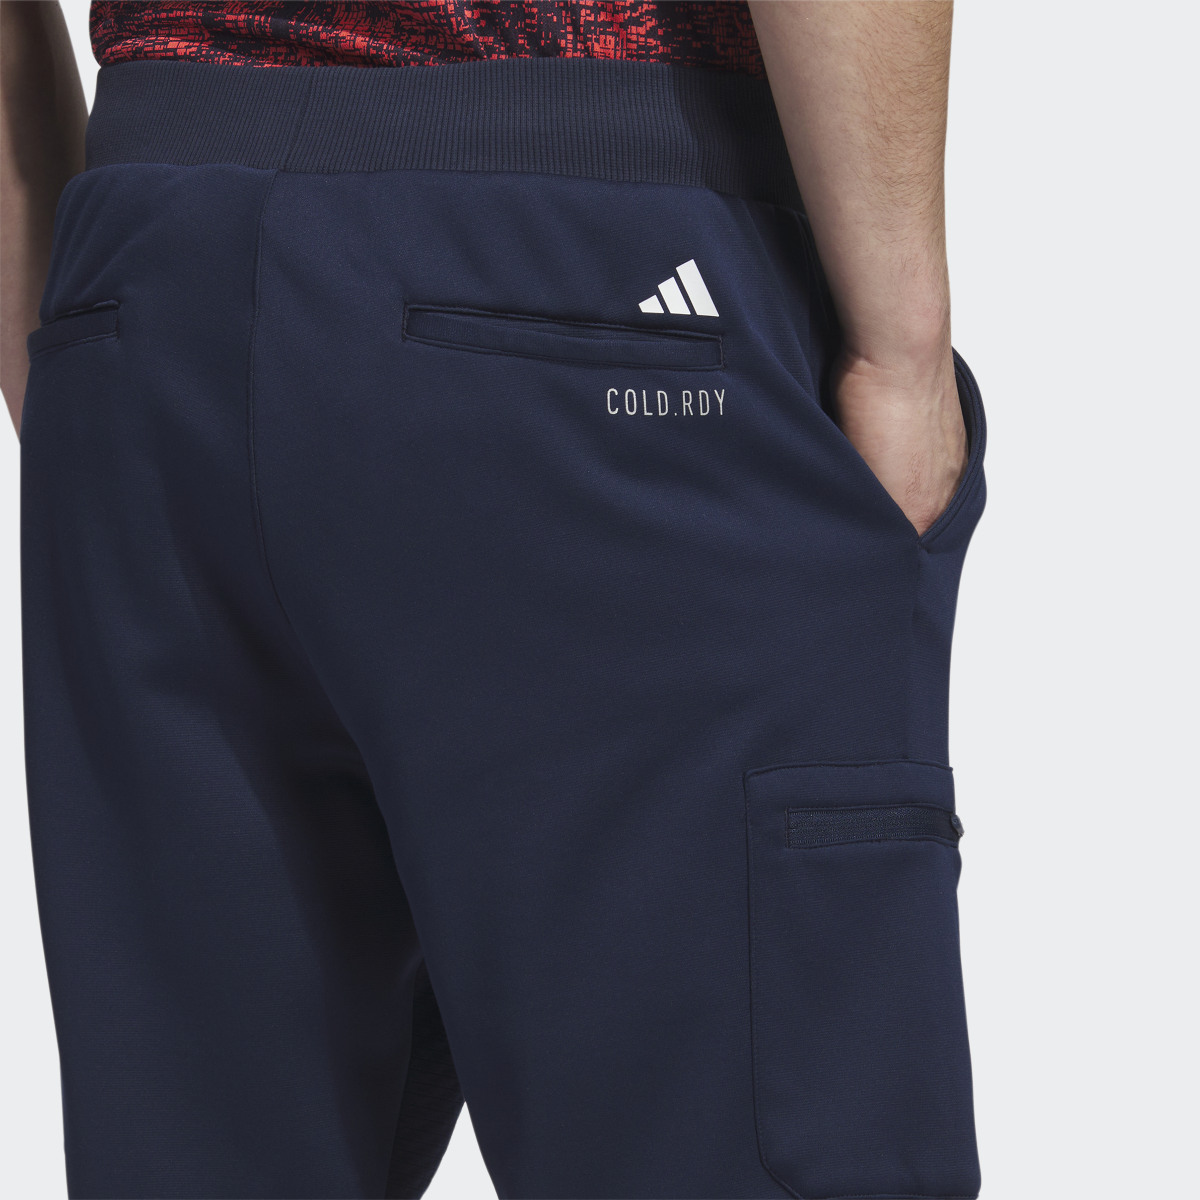 Adidas COLD.RDY Joggers. 7